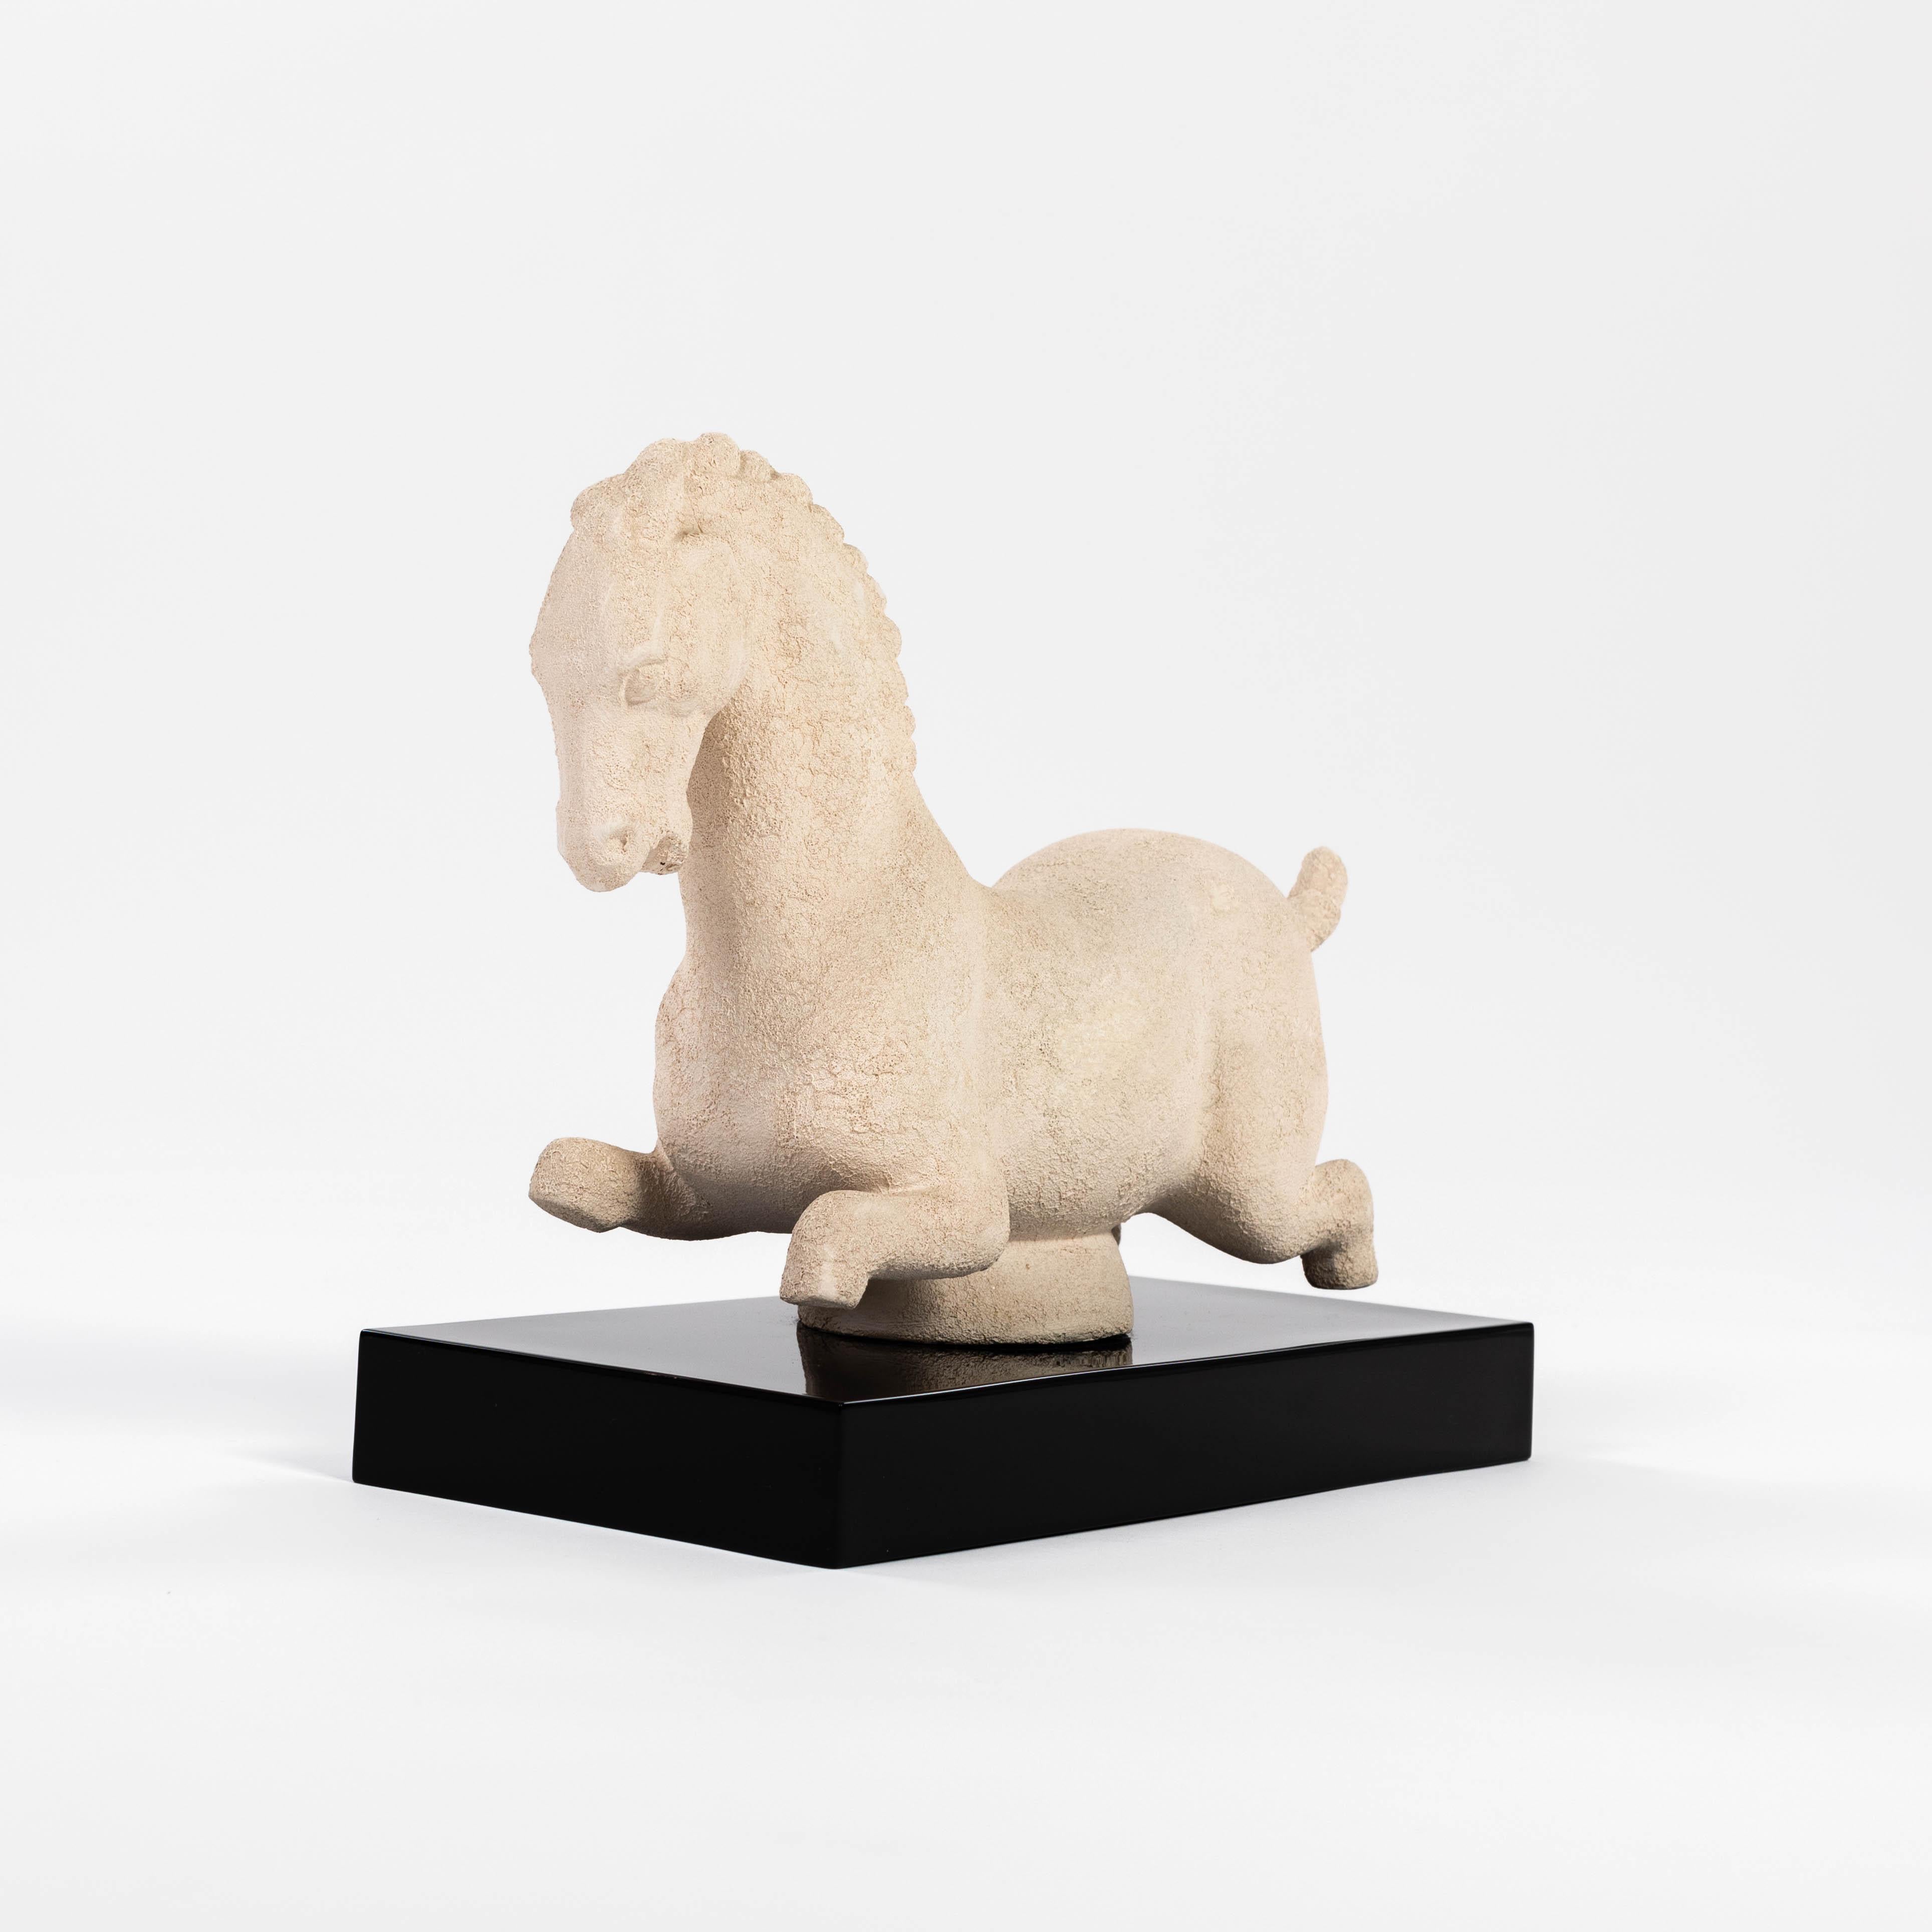 A stylized ceramic horse on a black lacquered wooden base. 
The ceramic has a matte, open-pored and grainy surface, the forms are soft.
The striking high gloss lacquered wooden base (lacquer renewed) 
provides a perfect presentation surface for the